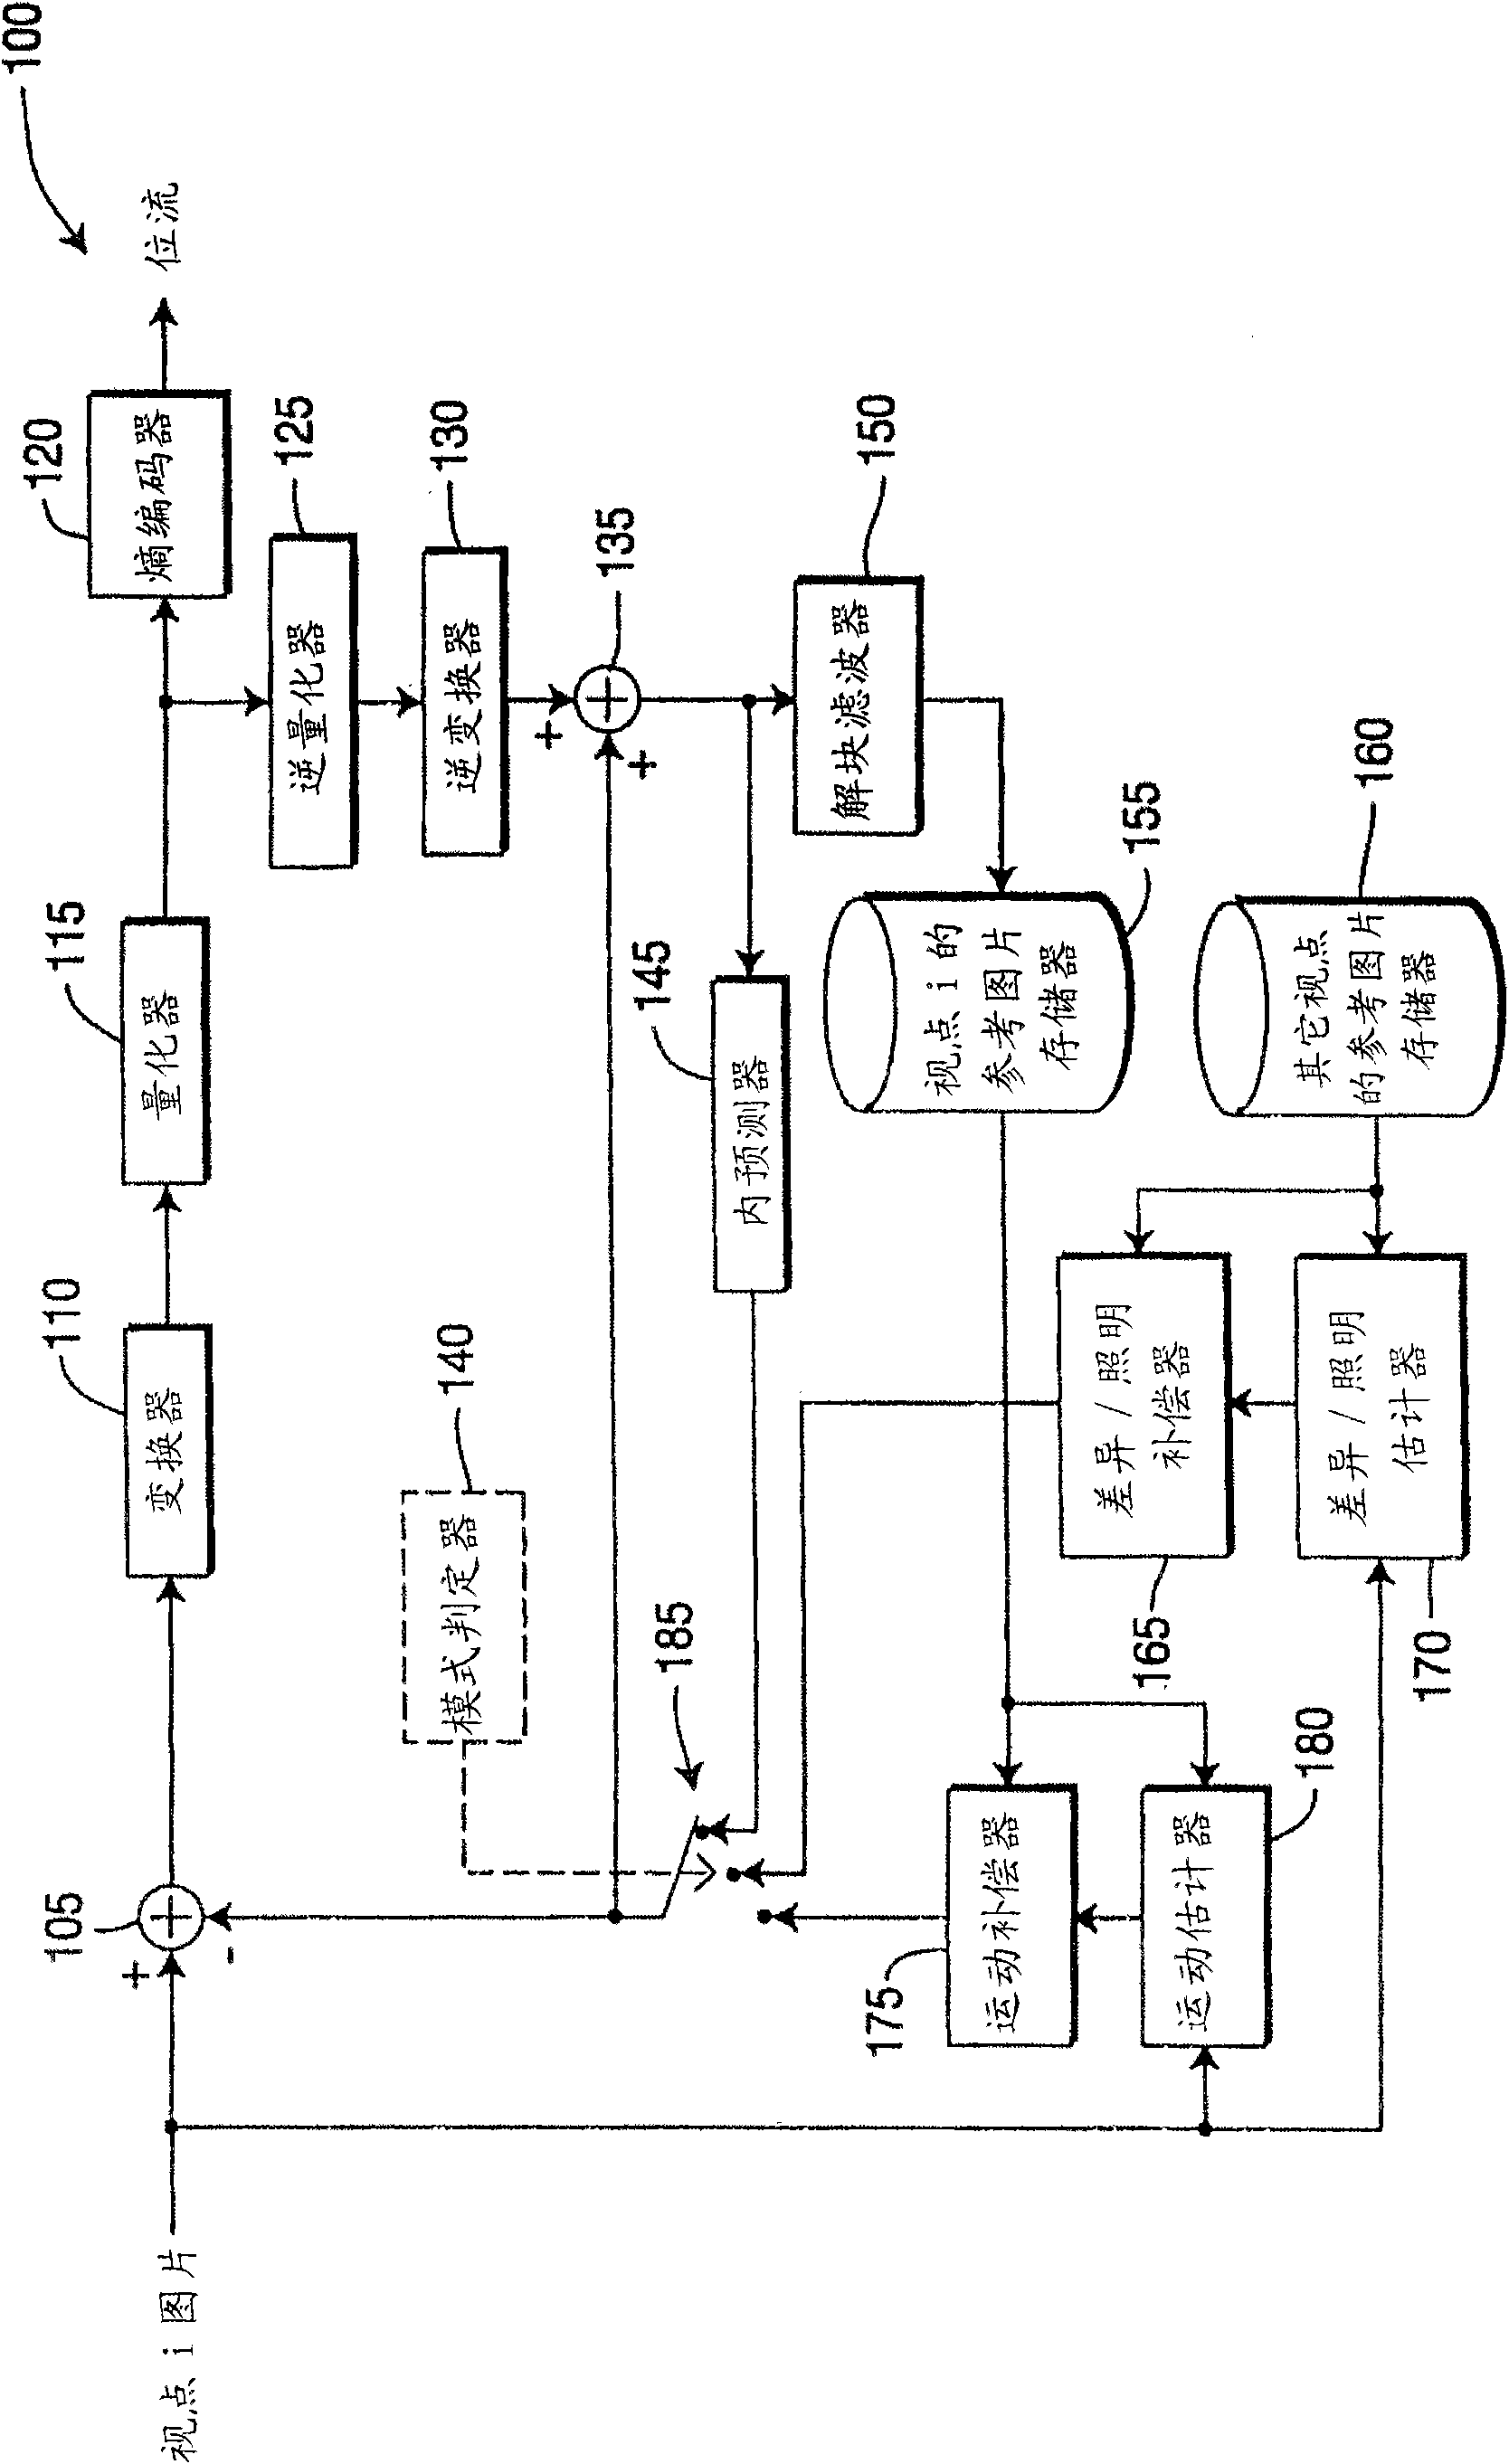 Method and apparatus for local illumination and color compensation without explicit signaling